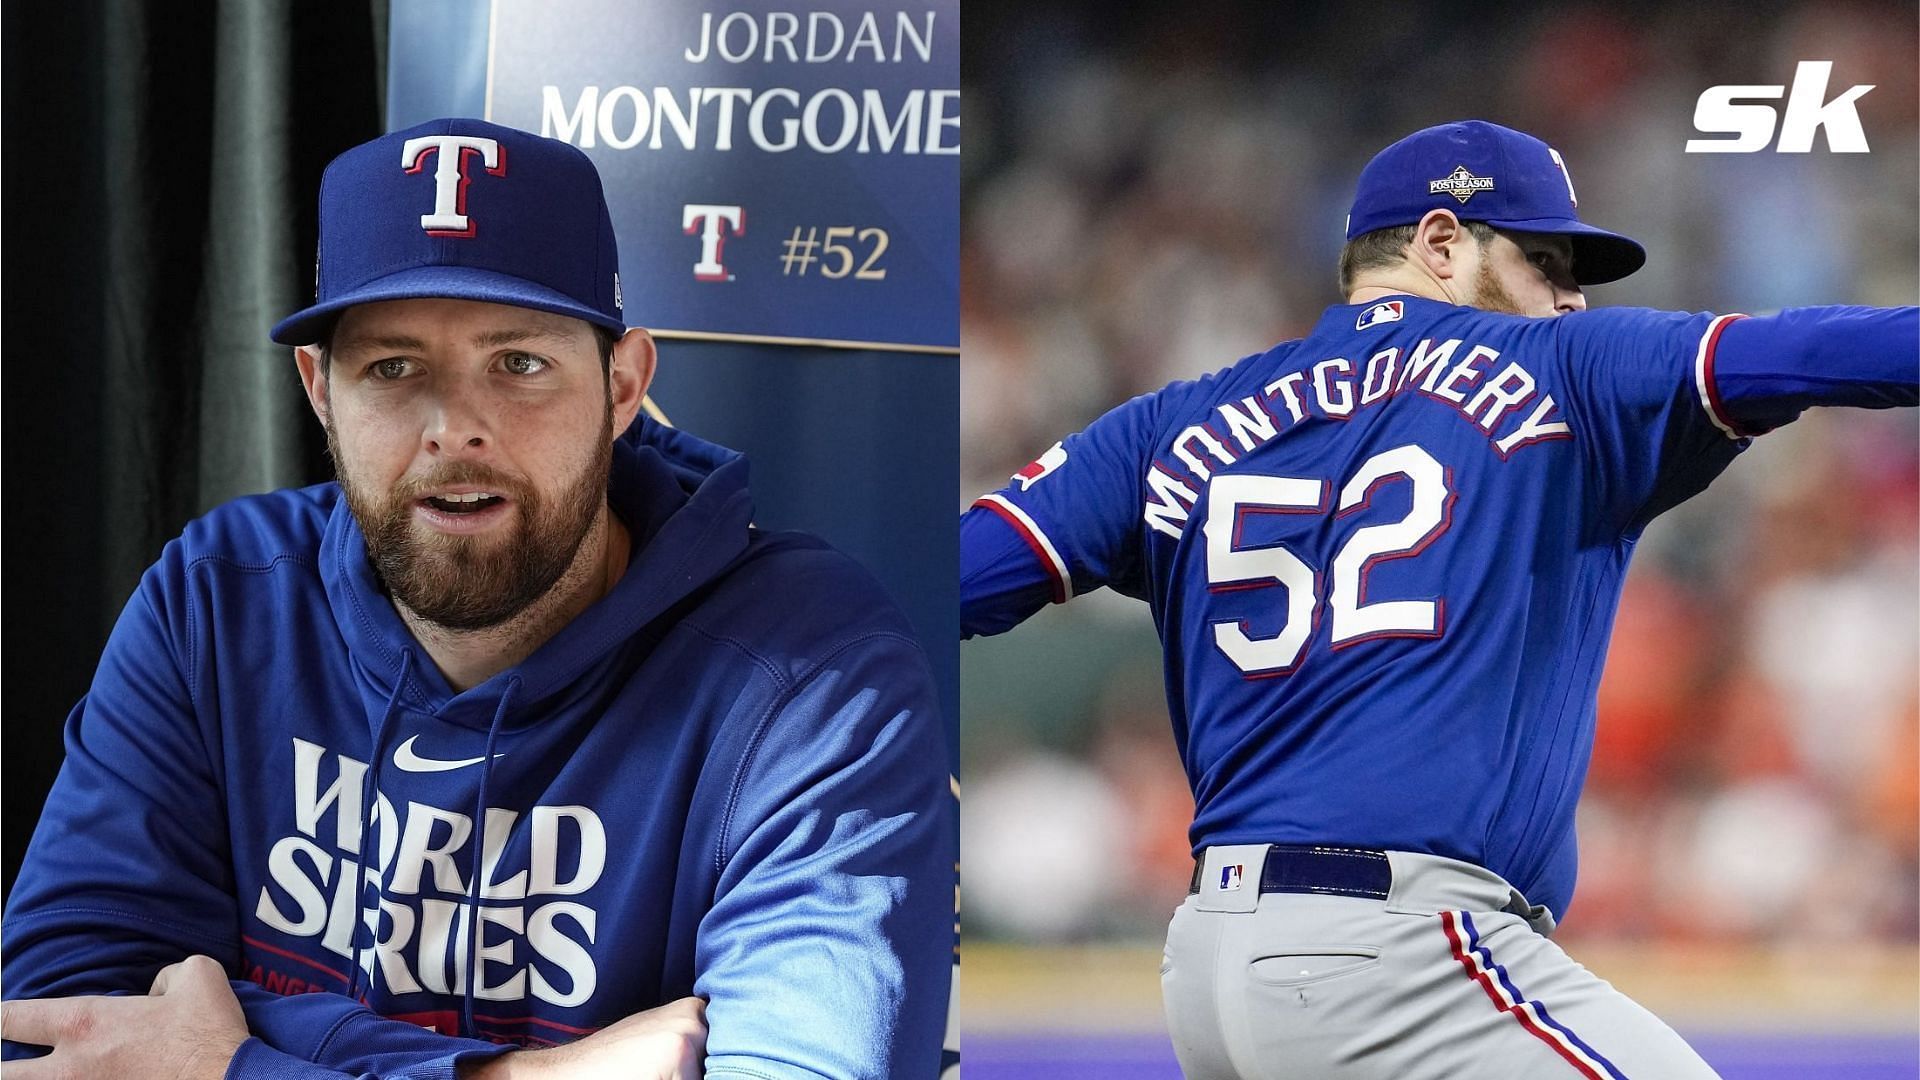 Texas Rangers starter Jordan Montgomery says credits his high school coaches for teaching him to be stoic on the mound